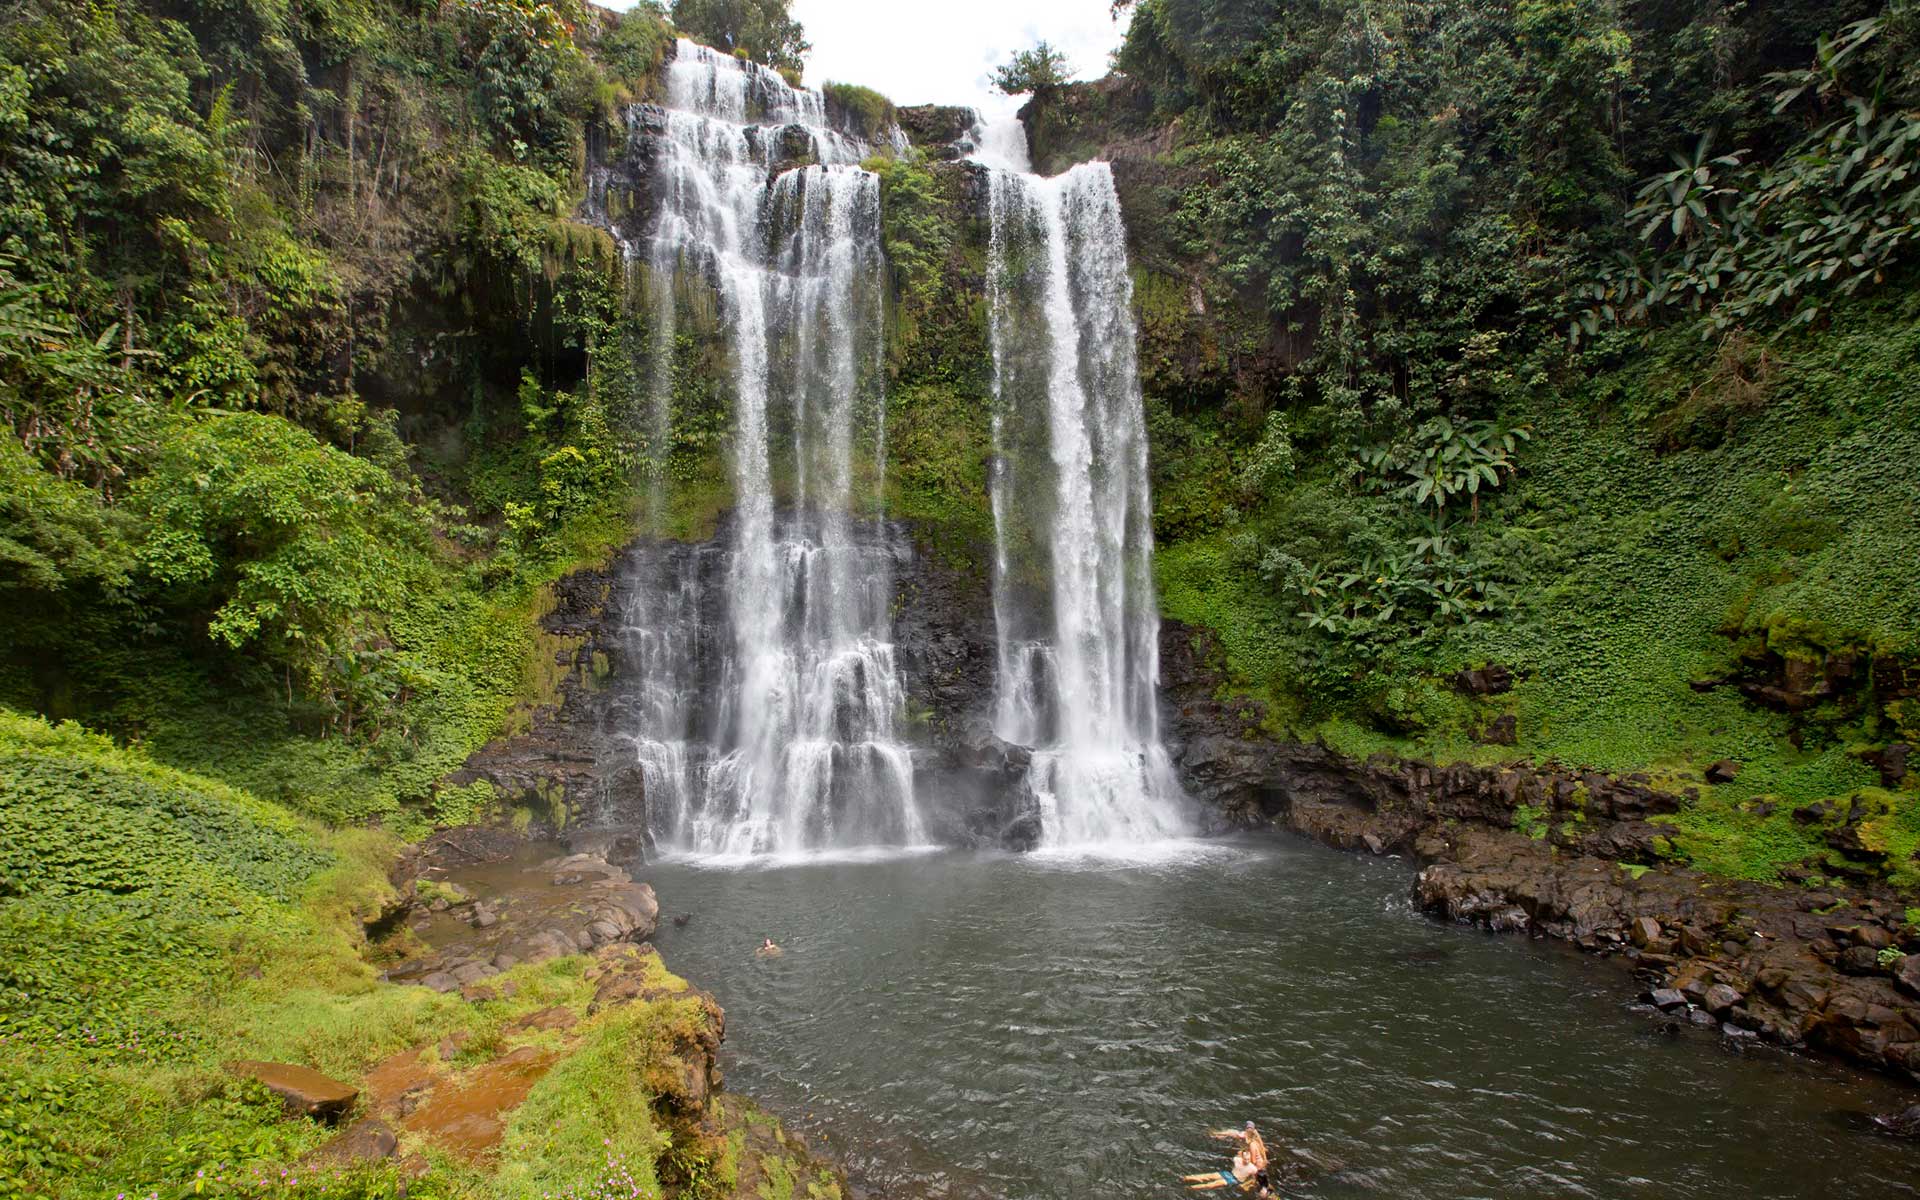 Tad Fane waterfall, situated in the Bolaven Plateau